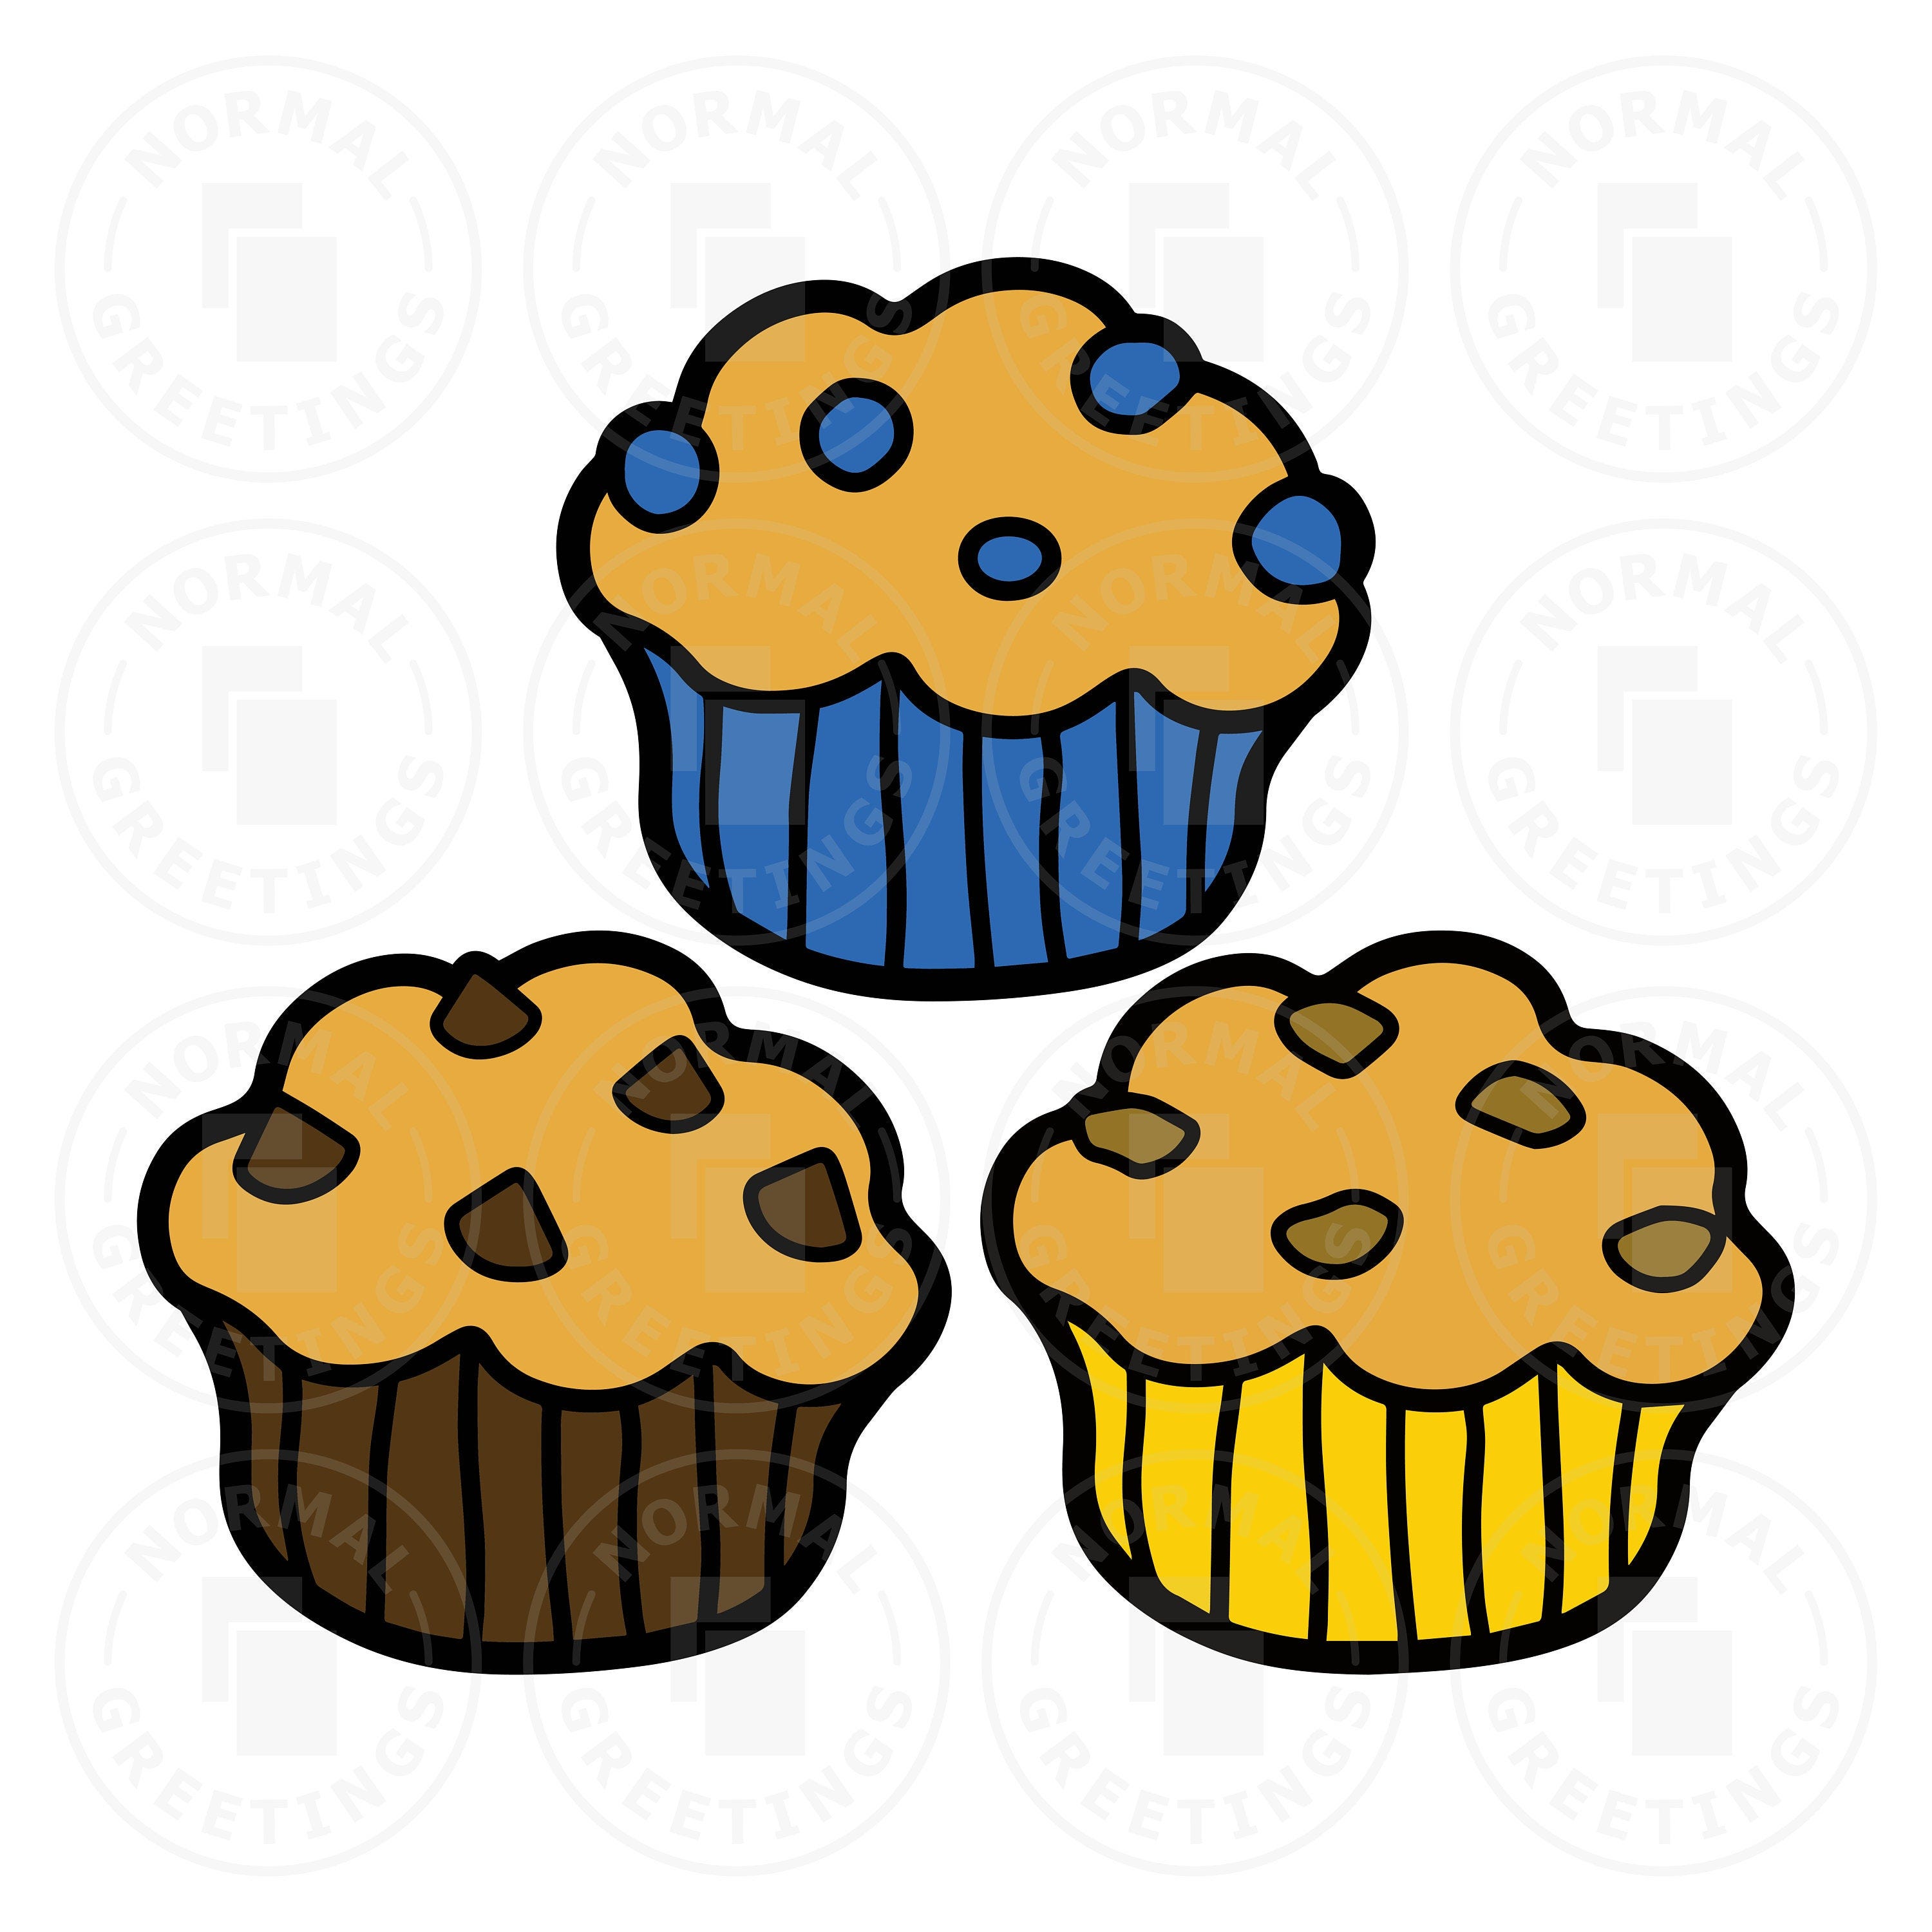 Muffins Cricut Cut Files Bundle Blueberry Banana Nut Chocolate Chip Muffin Layered SVG File Cute Snack Sweets Pastries Cupcakes Clip Art PNG